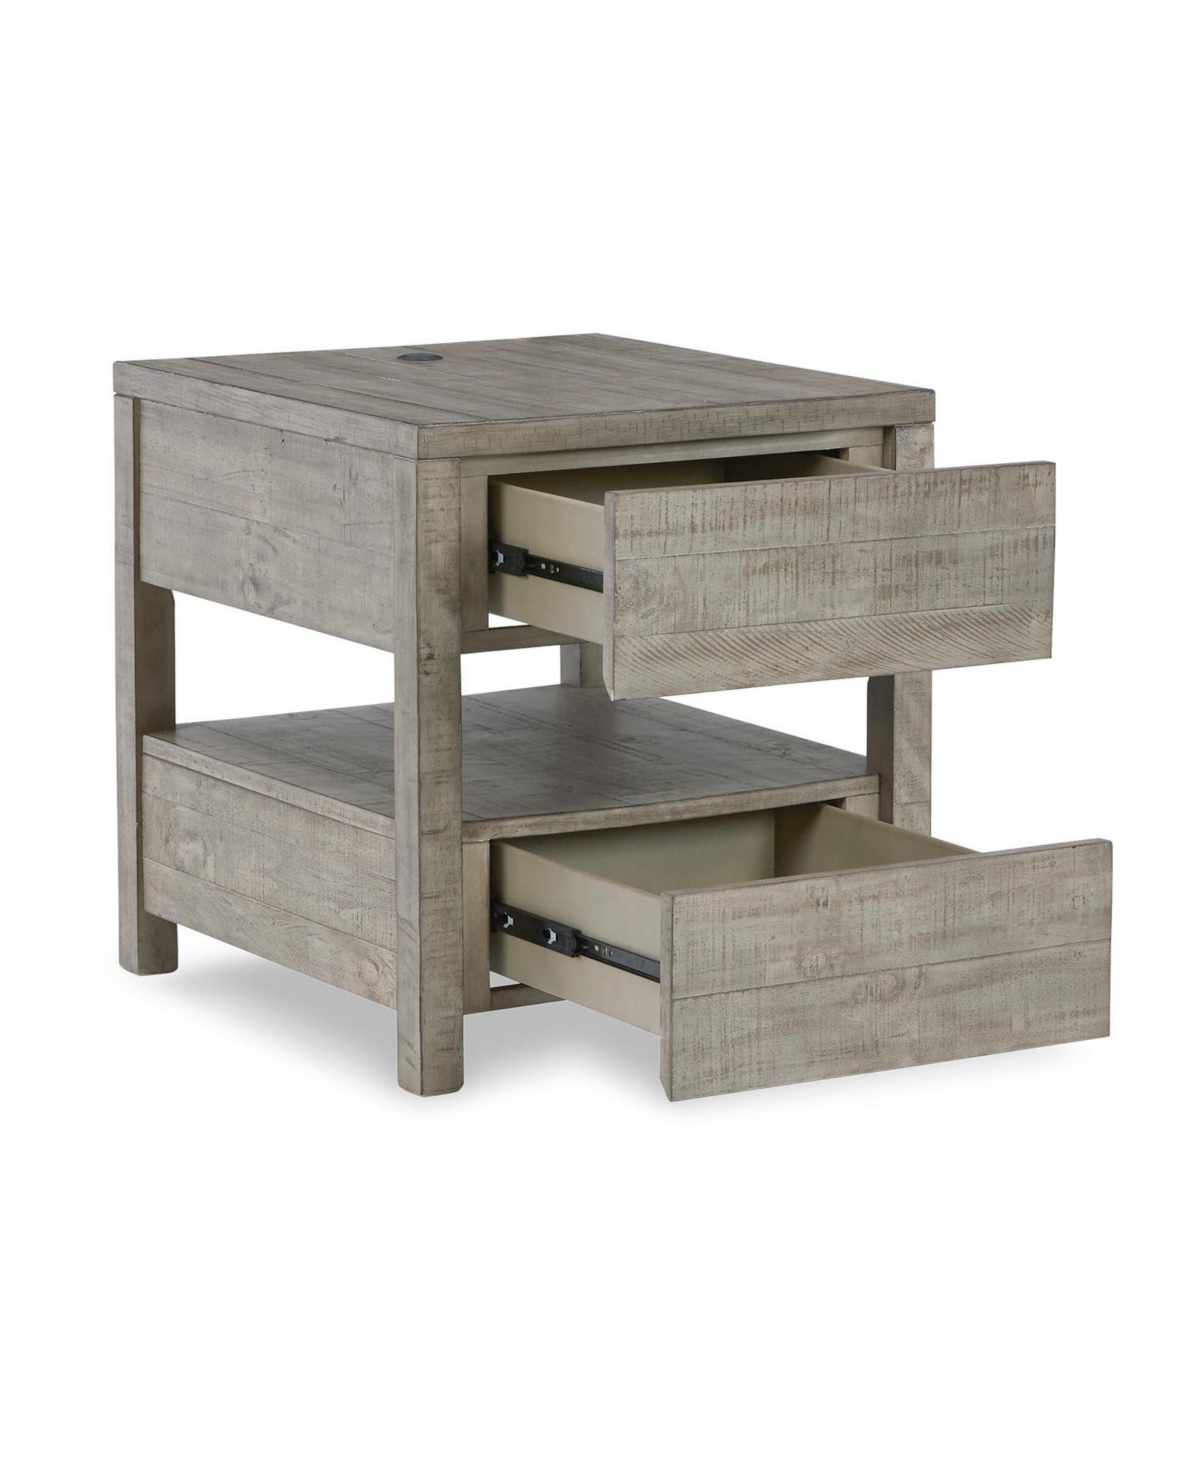 Signature Design By Ashley Krystanza Rectangular End Table In Weathered Gray